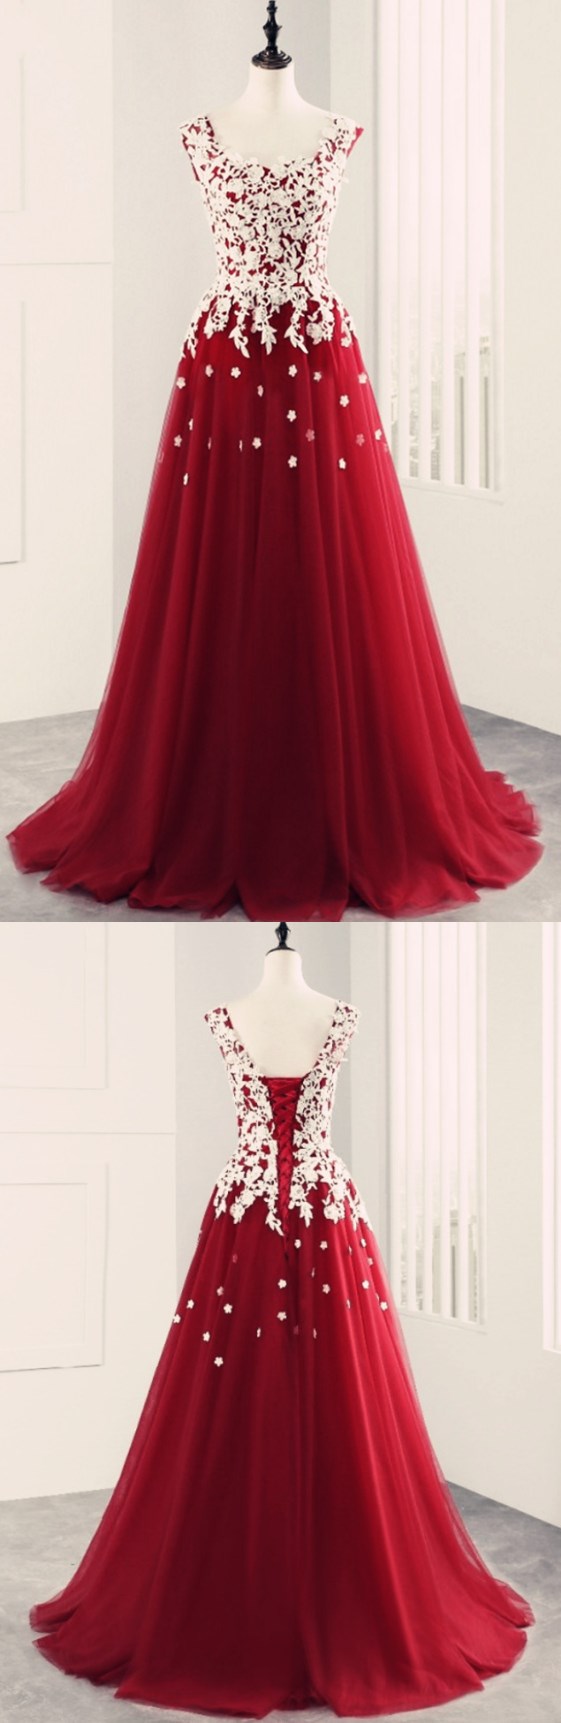 Dark Red Lace Applique Ball Gown Sweetheart Long Prom Dresses 2018 Red Formal Gowns Party Dresses